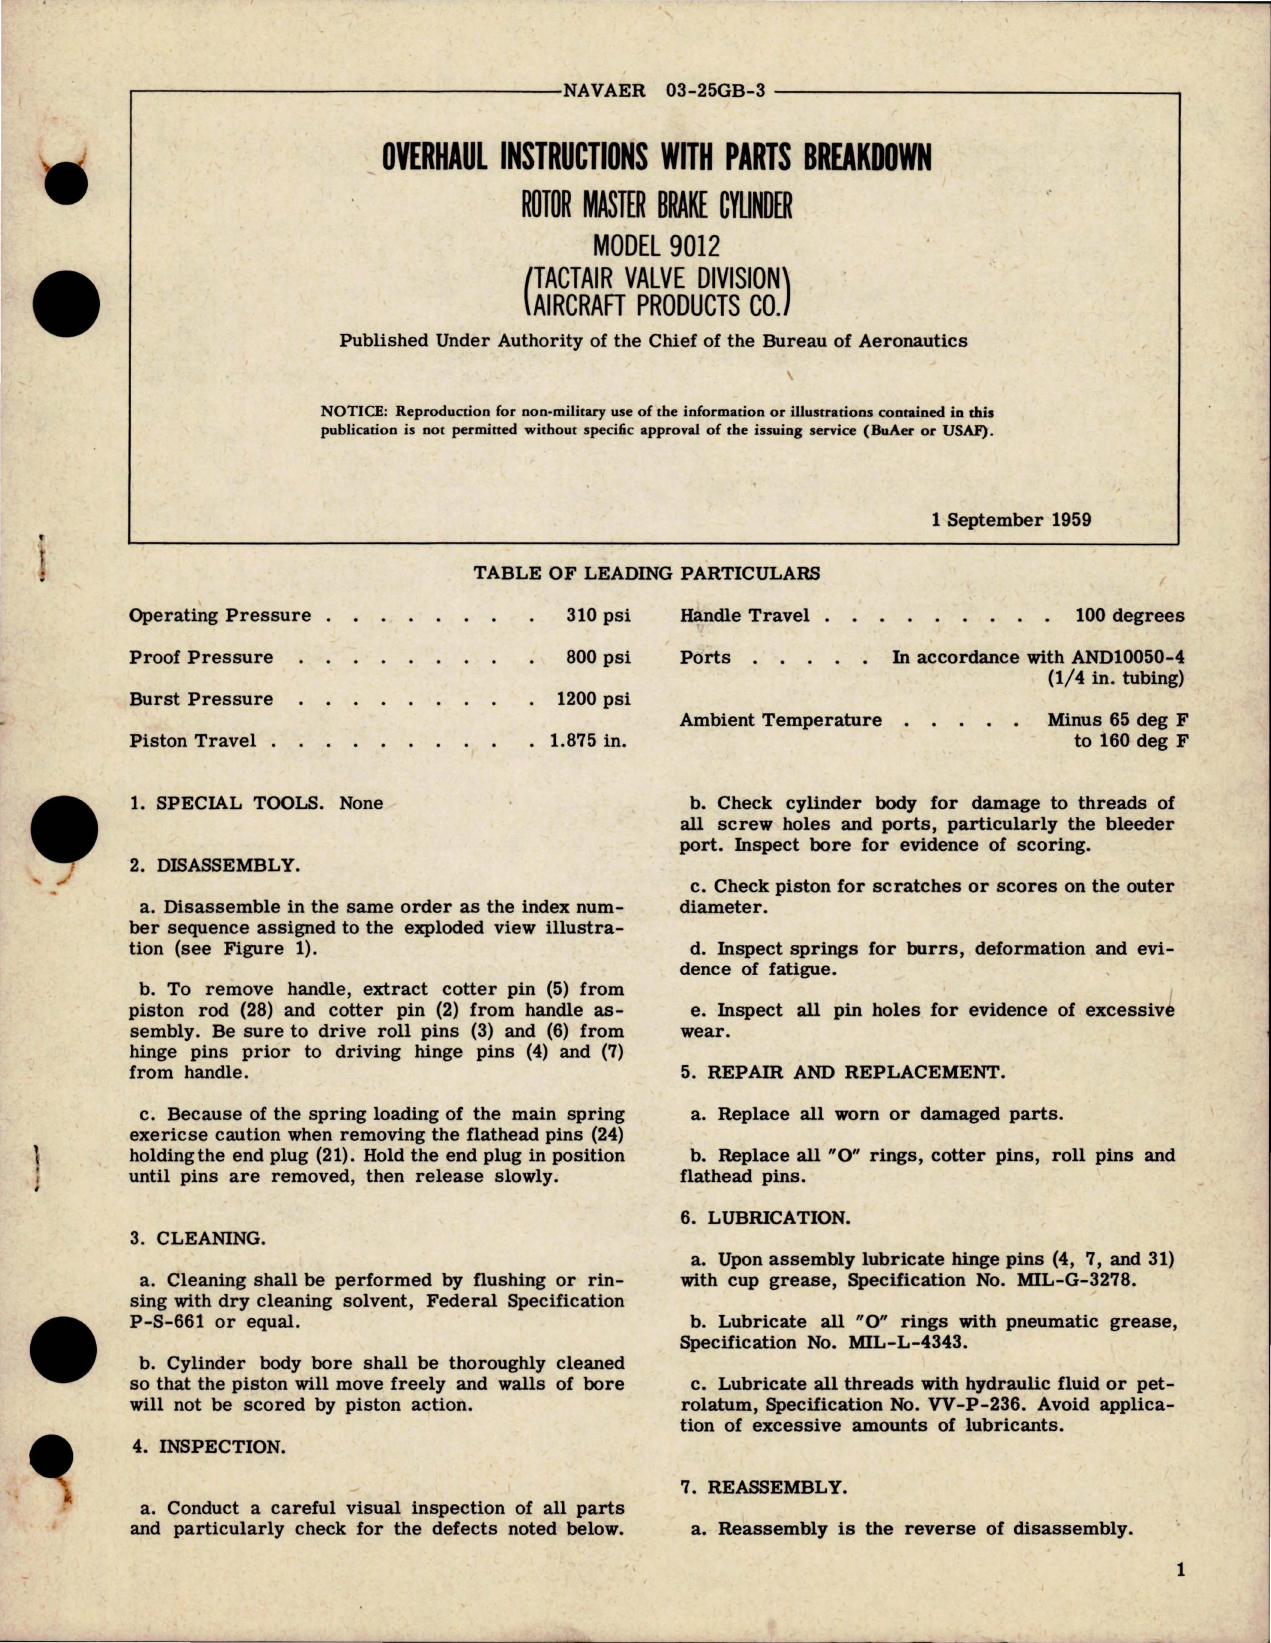 Sample page 1 from AirCorps Library document: Overhaul Instructions with Parts Breakdown for Rotor Master Brake Cylinder - Model 9012